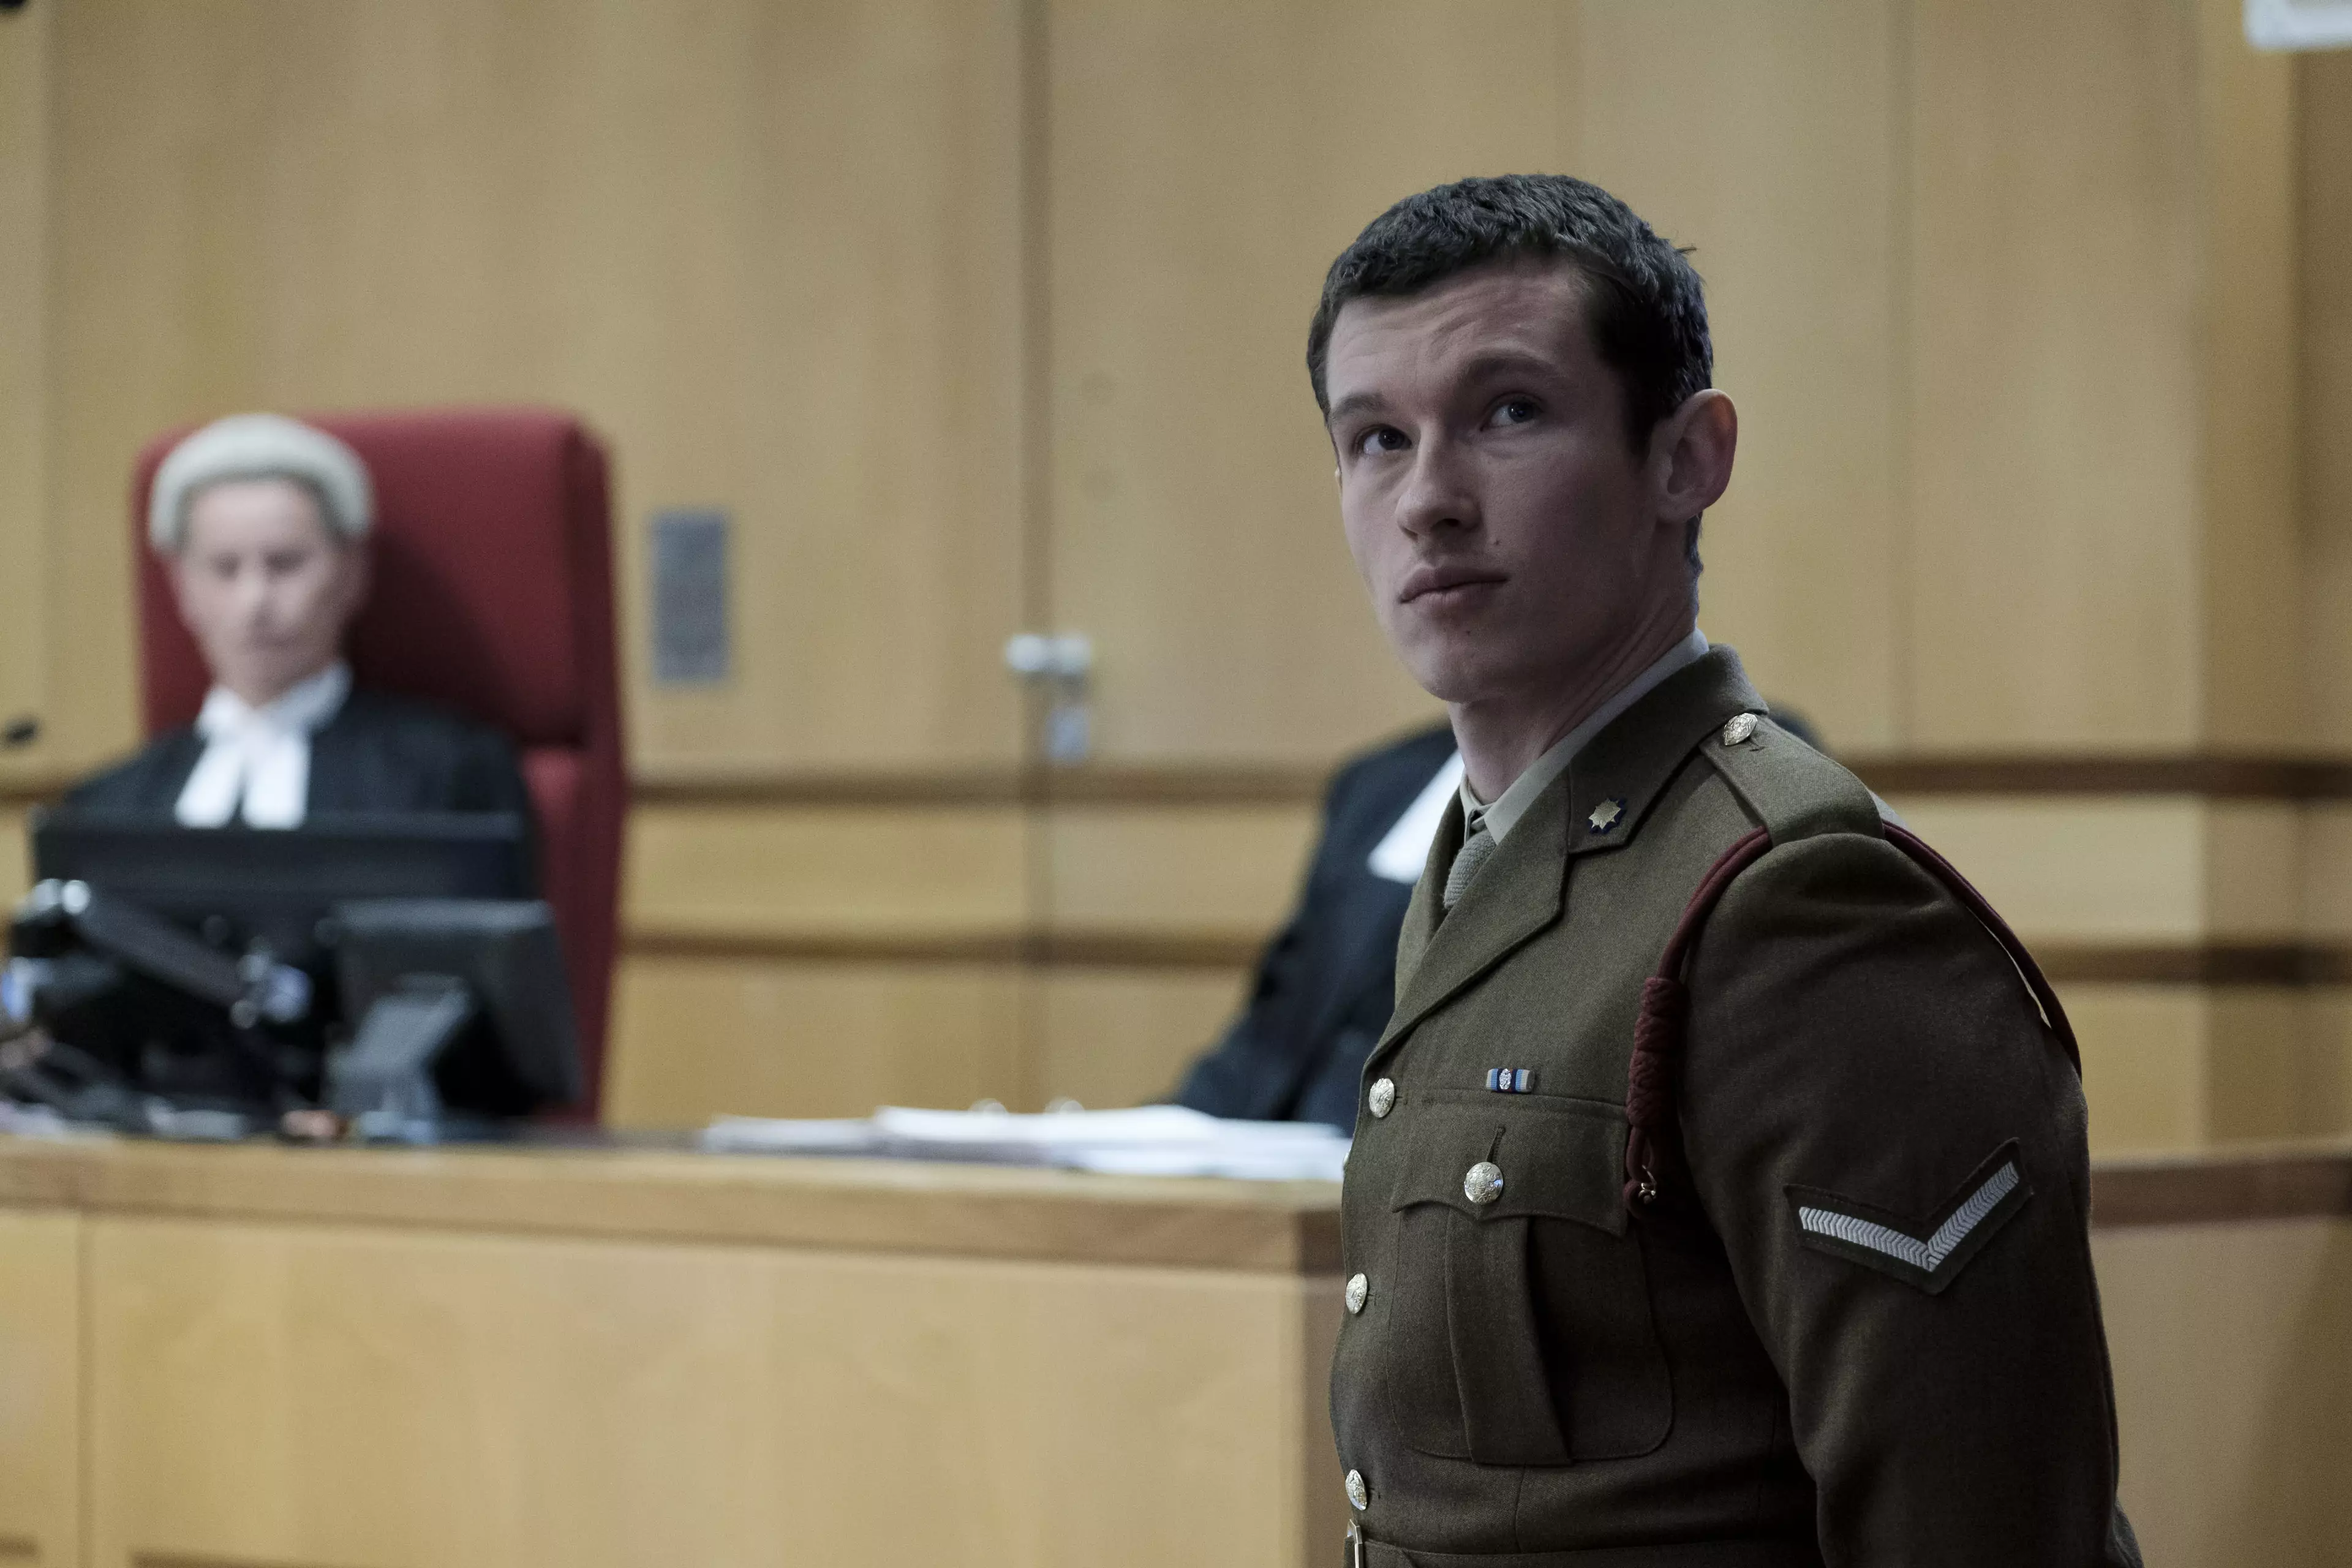 The Capture's lead character Shaun is wrongly convicted of murder